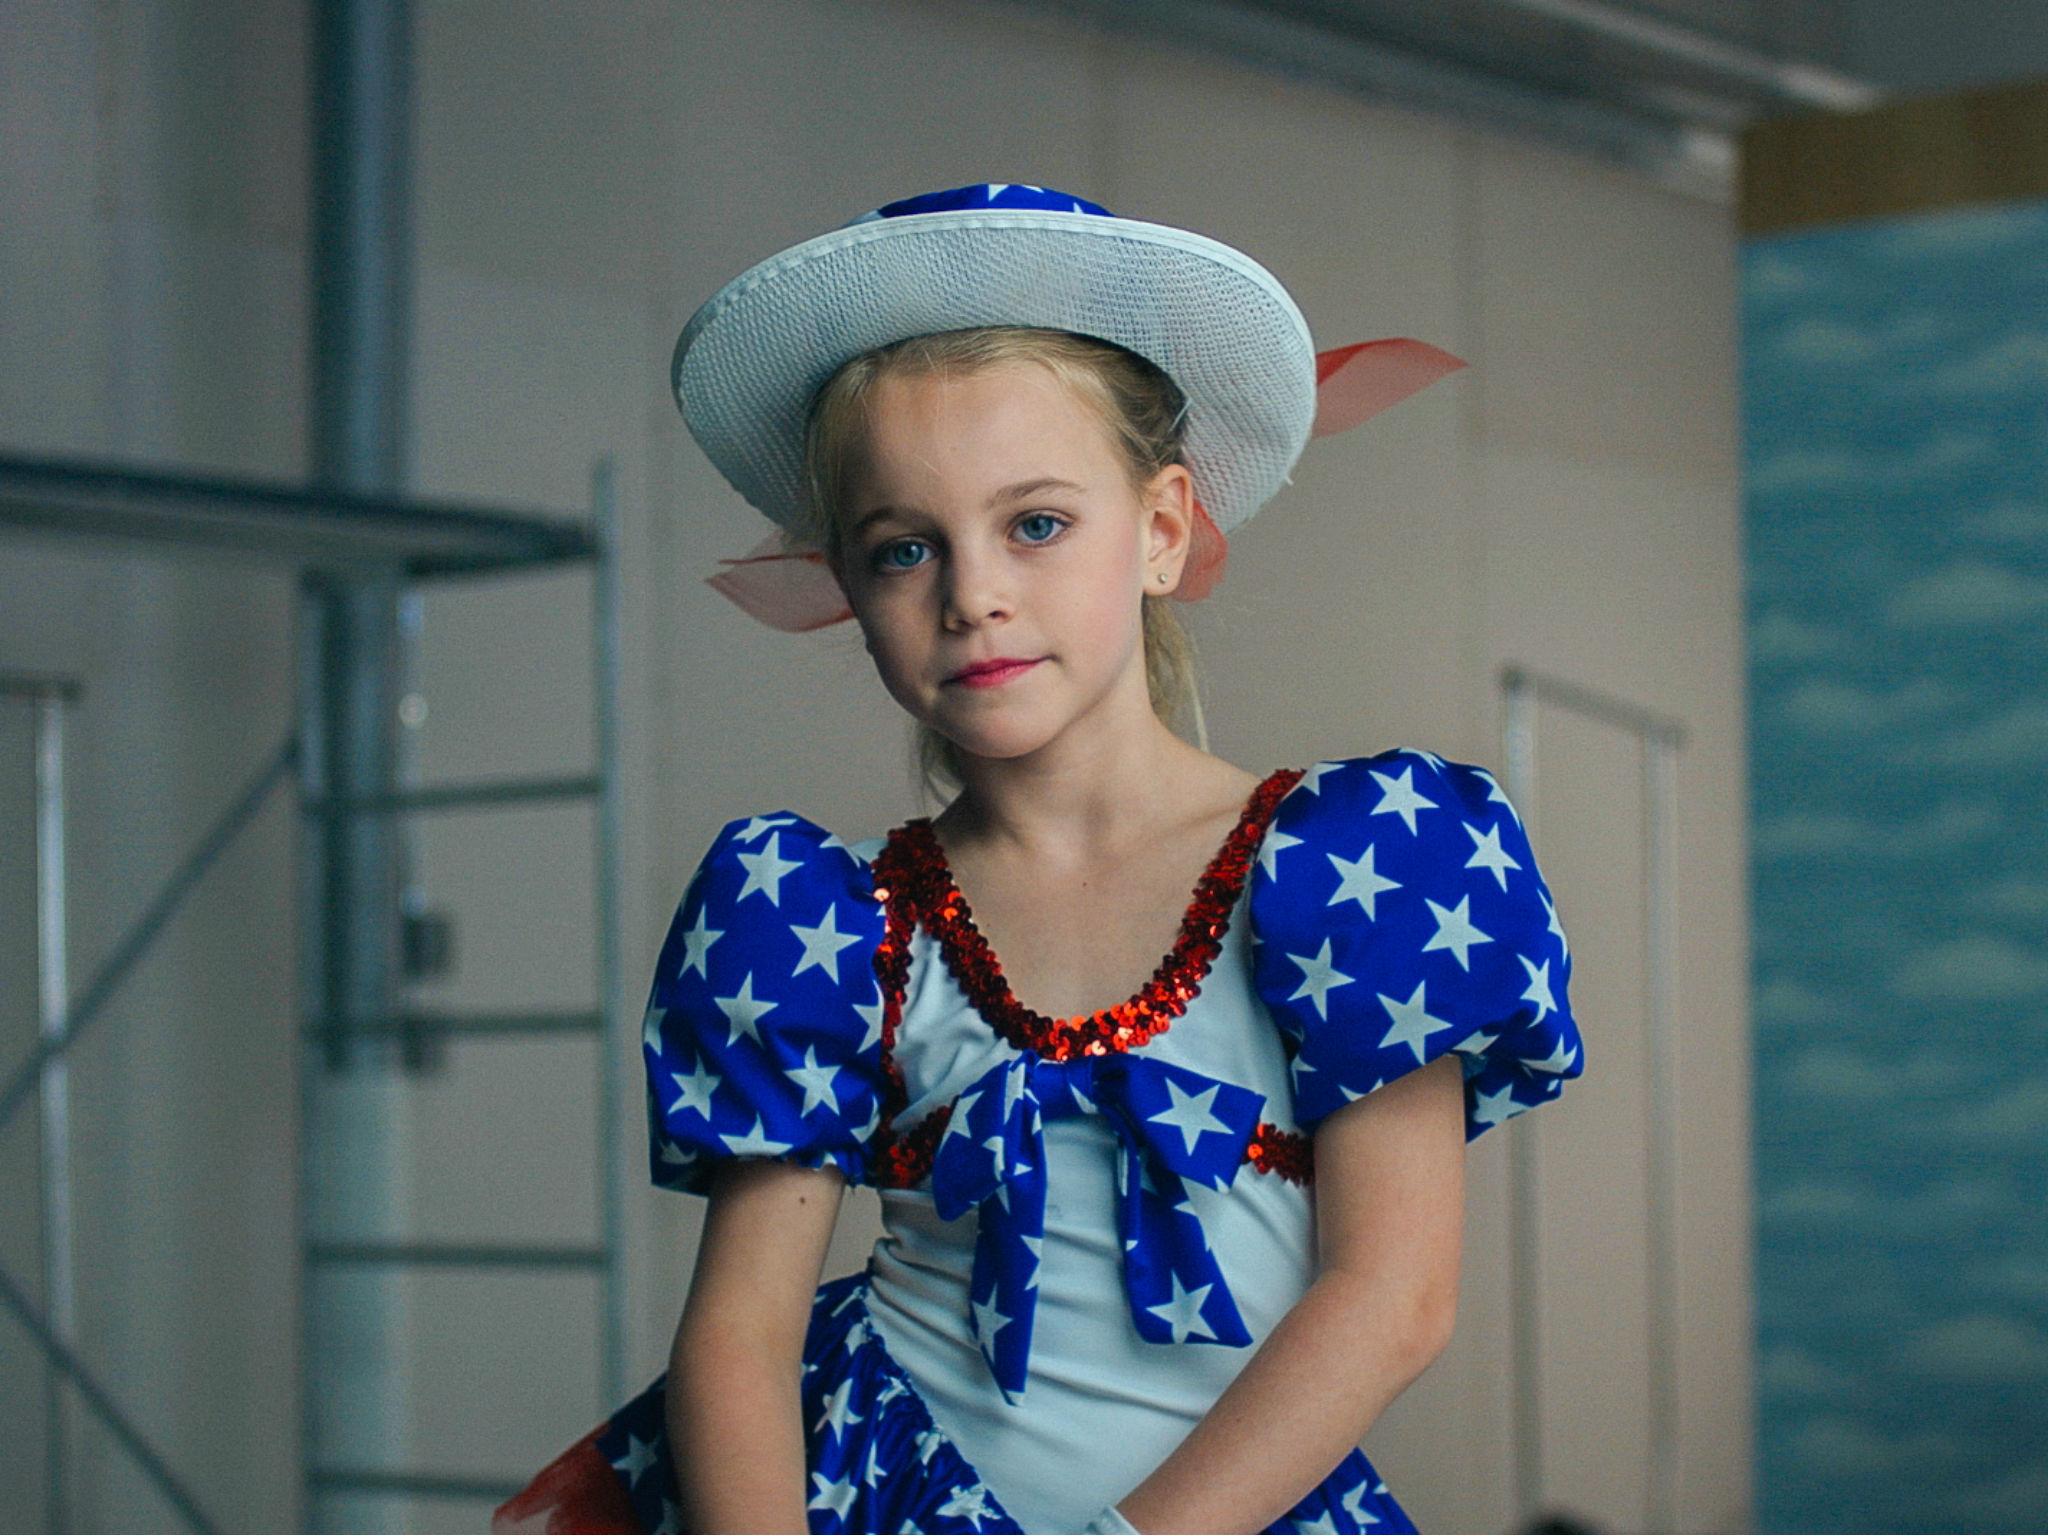 A new documentary film 'Casting JonBenet' on Netflix explores the American child beauty pageant queen's murder